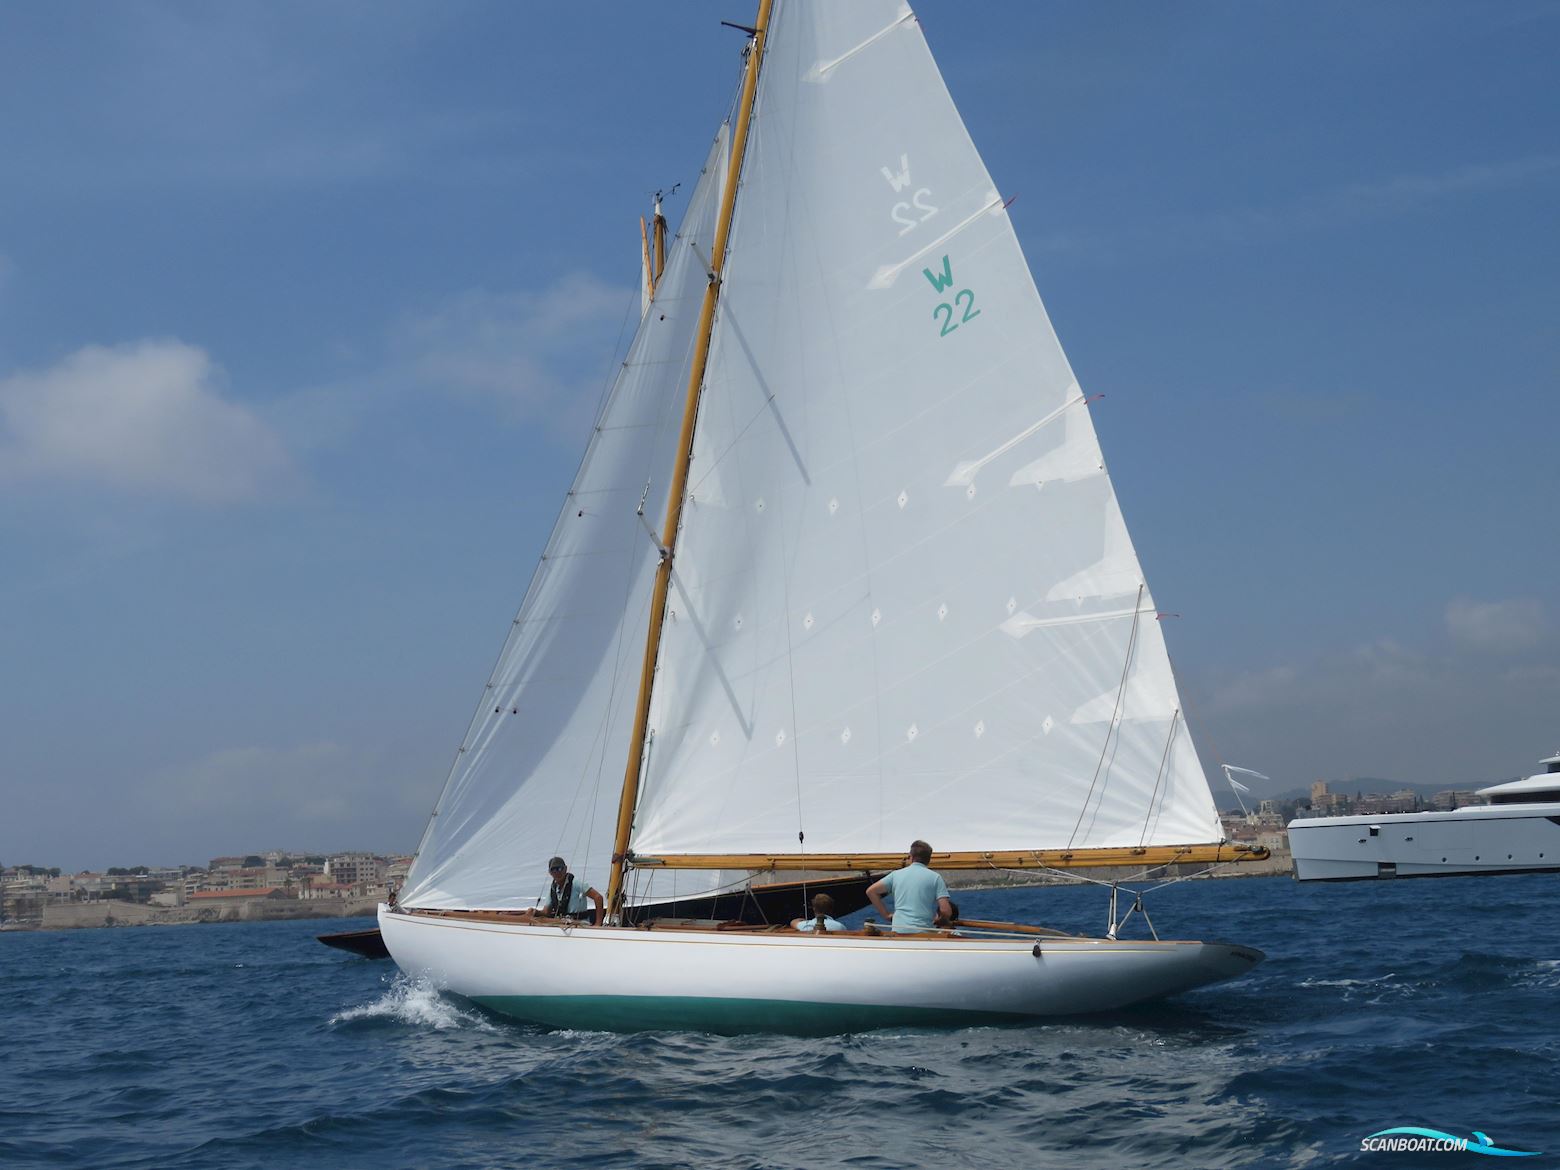 Classic Yacht West Solent One Design Sailing boat 1927, with Small Petrol Outboard engine, France